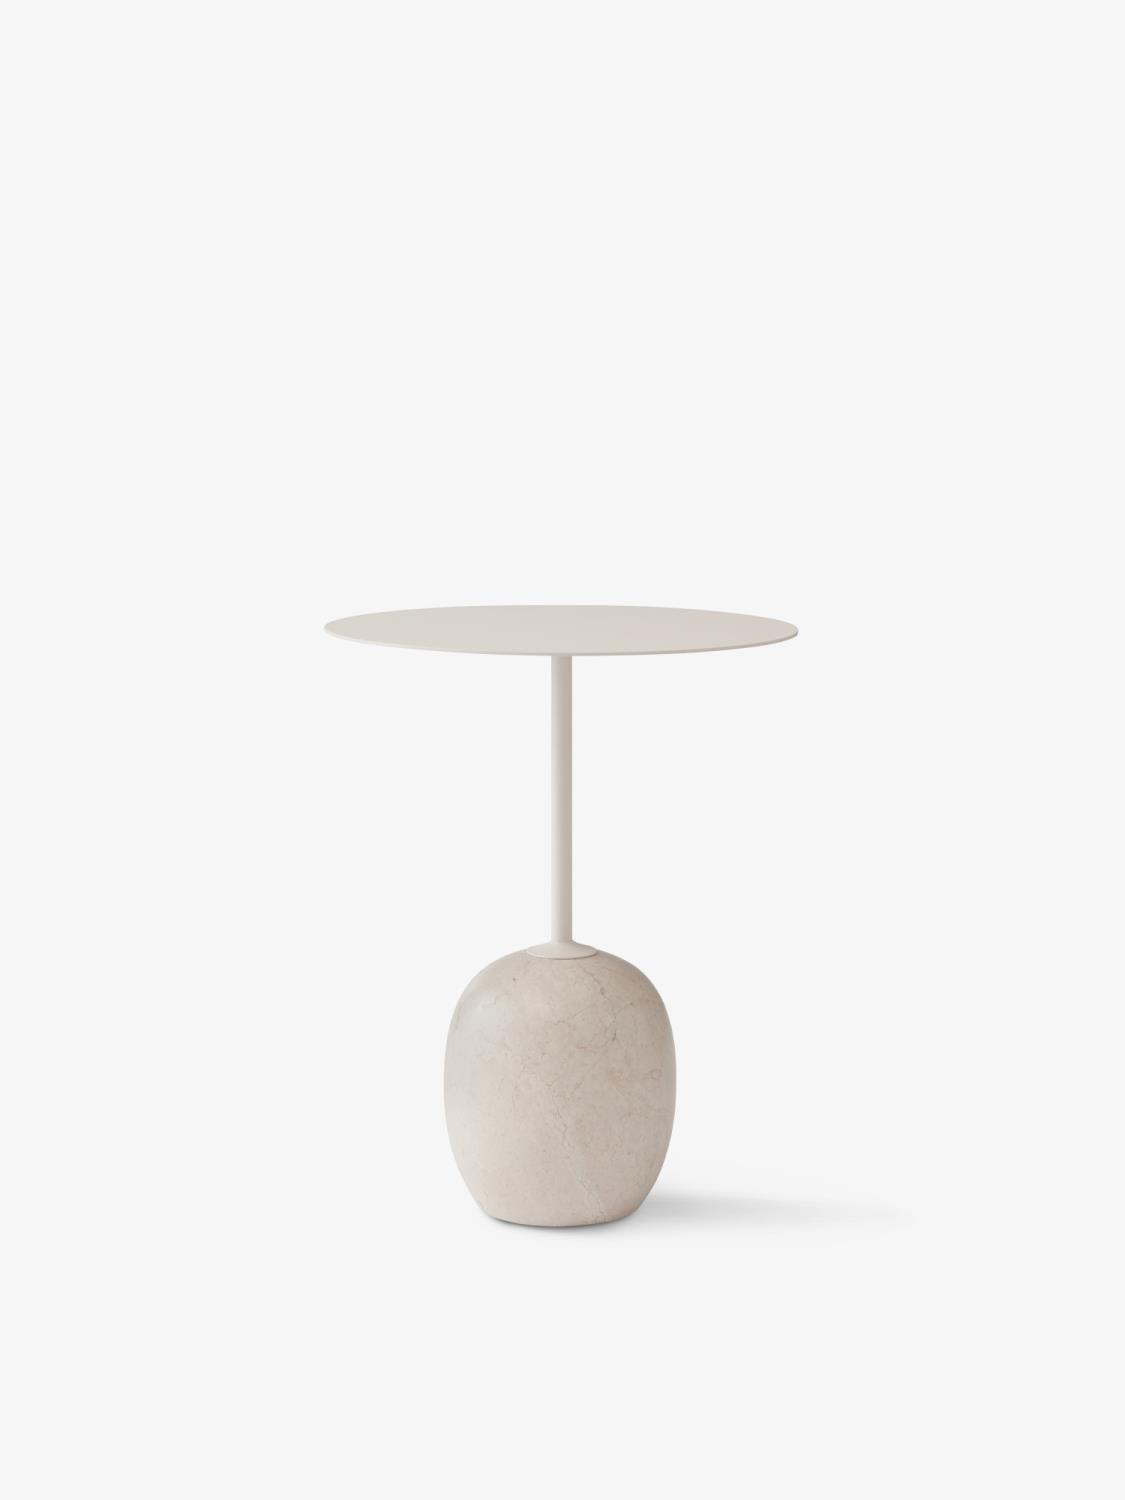 &Tradition - Lato Table LN8 - Round - Ivory White and Crema Diva Marble